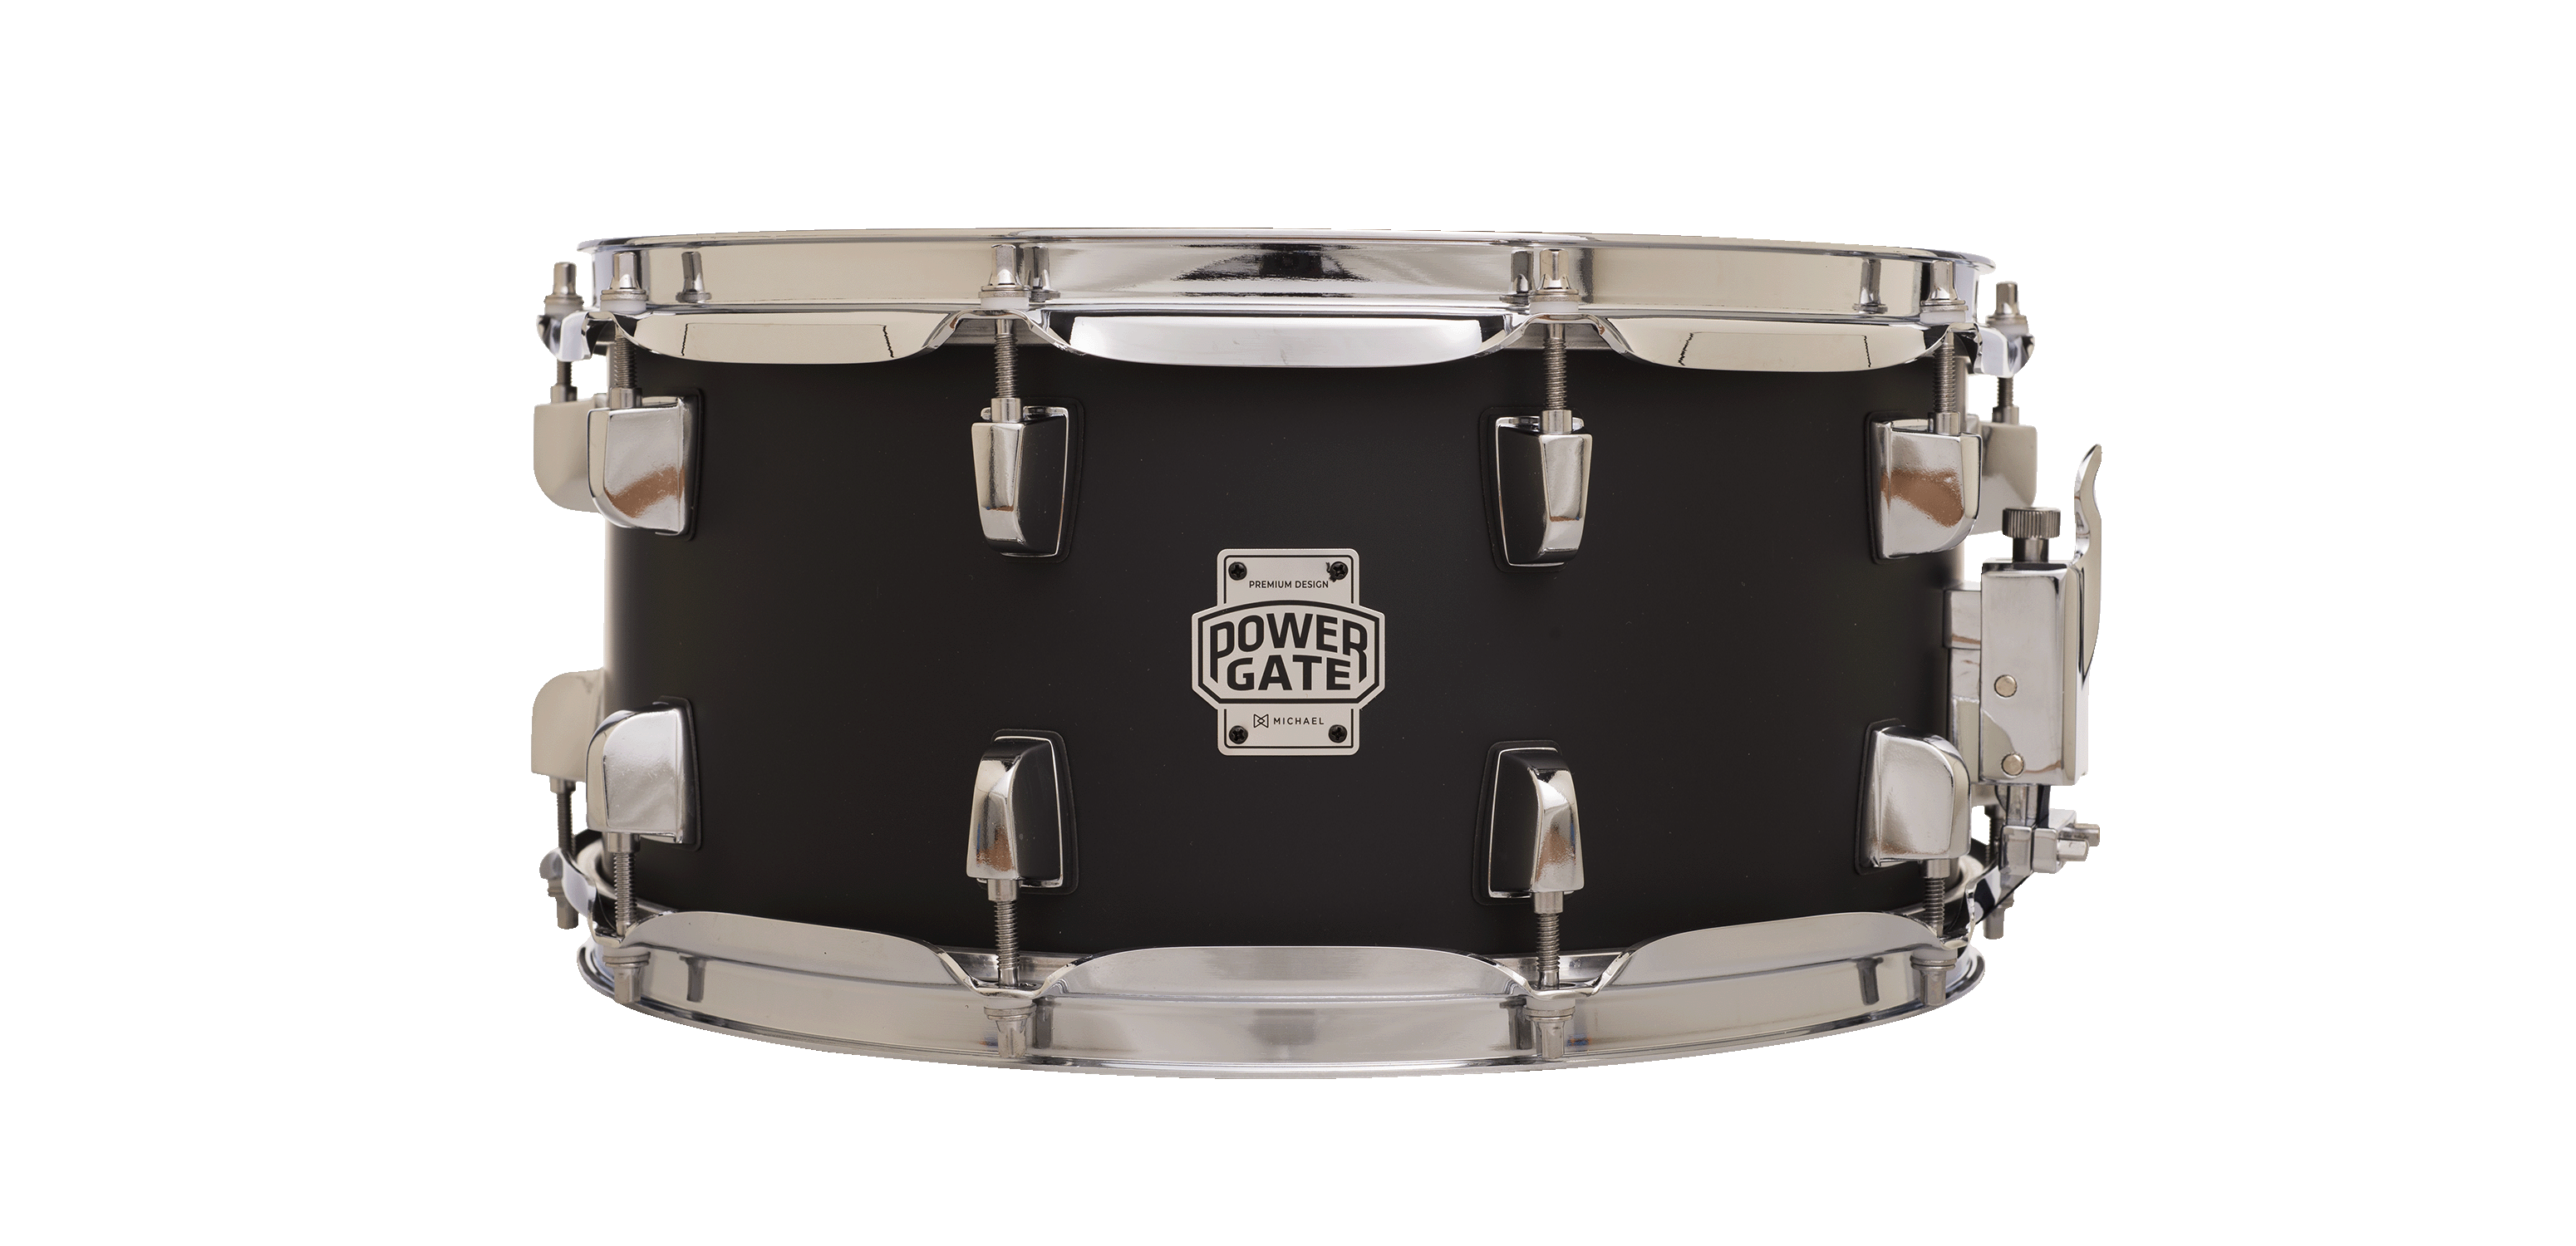 SNARE  MICHAEL POWERGATE STAGE PGS1465 JBK 14x6,5